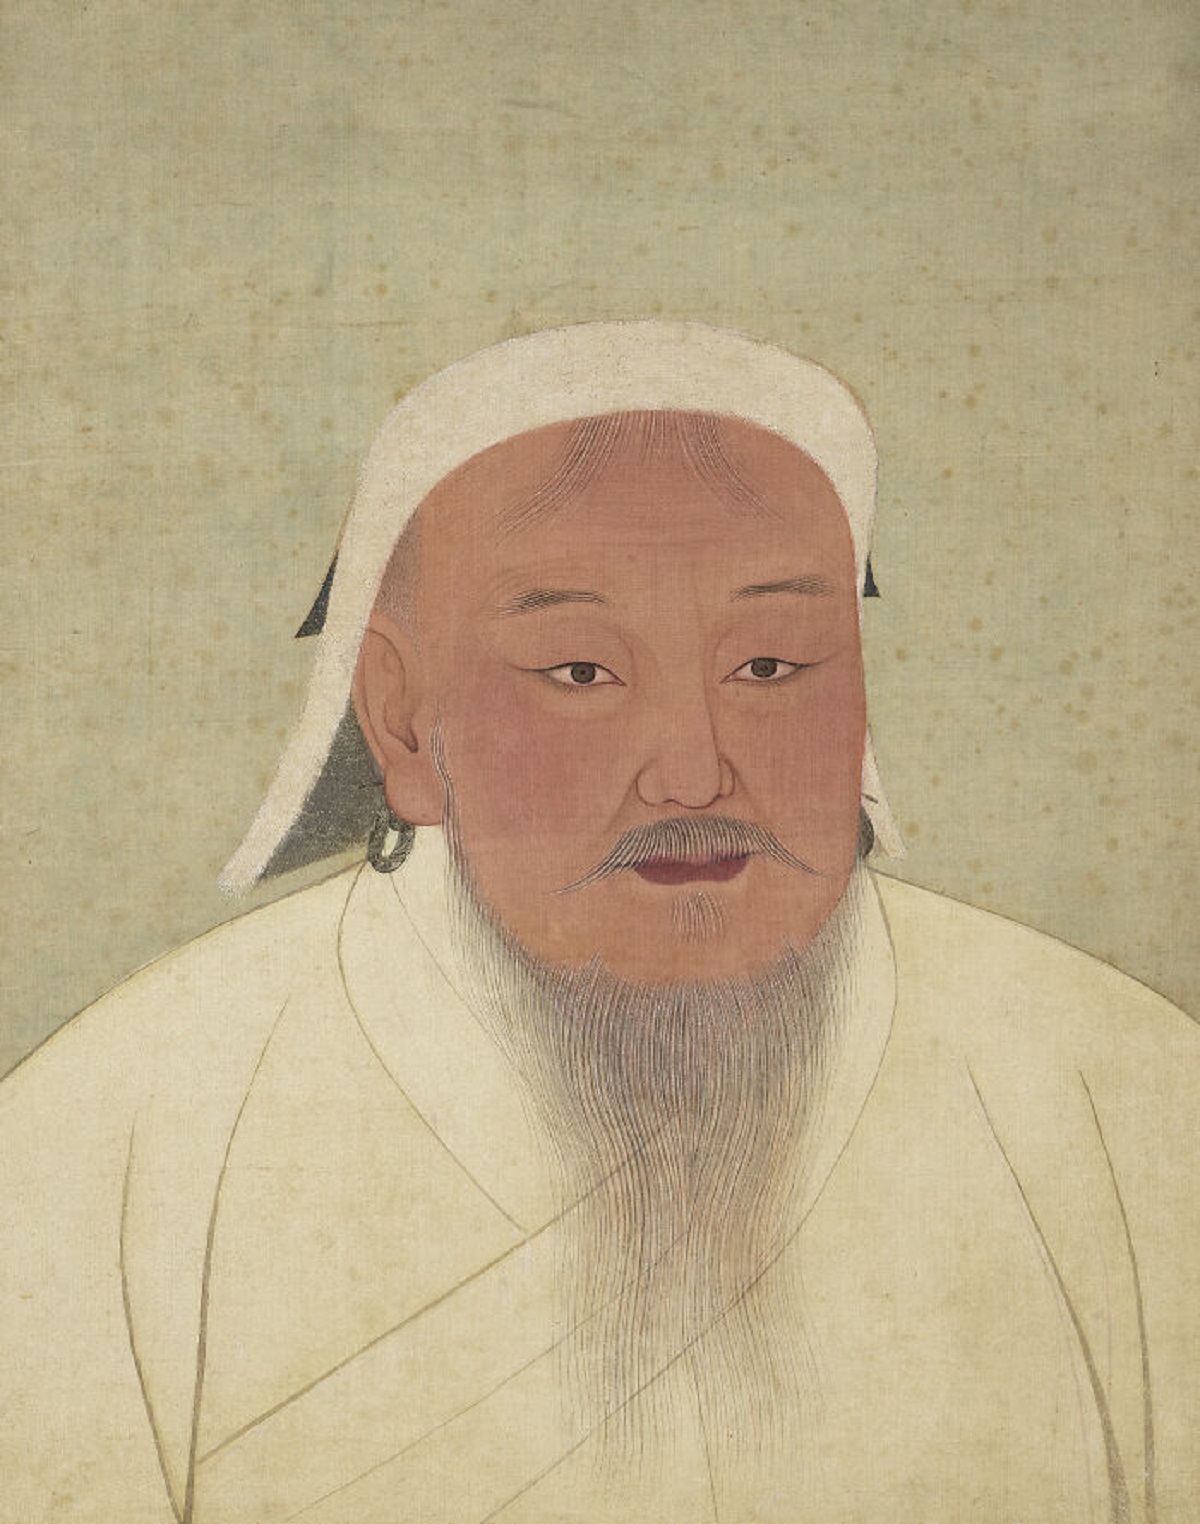 Genghis Khan.
Was waiting for this. Few people in history, let alone this list, come close to the level of civilisational and cultural death and destruction this man caused. Not only did he get away with it, he died an emperor and spawned a dynasty.
He would starve out entire cities because his army was so big, they would enslave or kill everyone and he would marry his daughters off to kings and whatnot then his daughters would kill them and take over the ruled lands to give to Kahns armies. Throughout his reign Kahn and his armies killed over 40 million people and enslaved twice that many.

Nearly 8 percent of the men living in the region of the former Mongol empire today carry y-chromosomes that are nearly identical to that of Genghis Kahn.